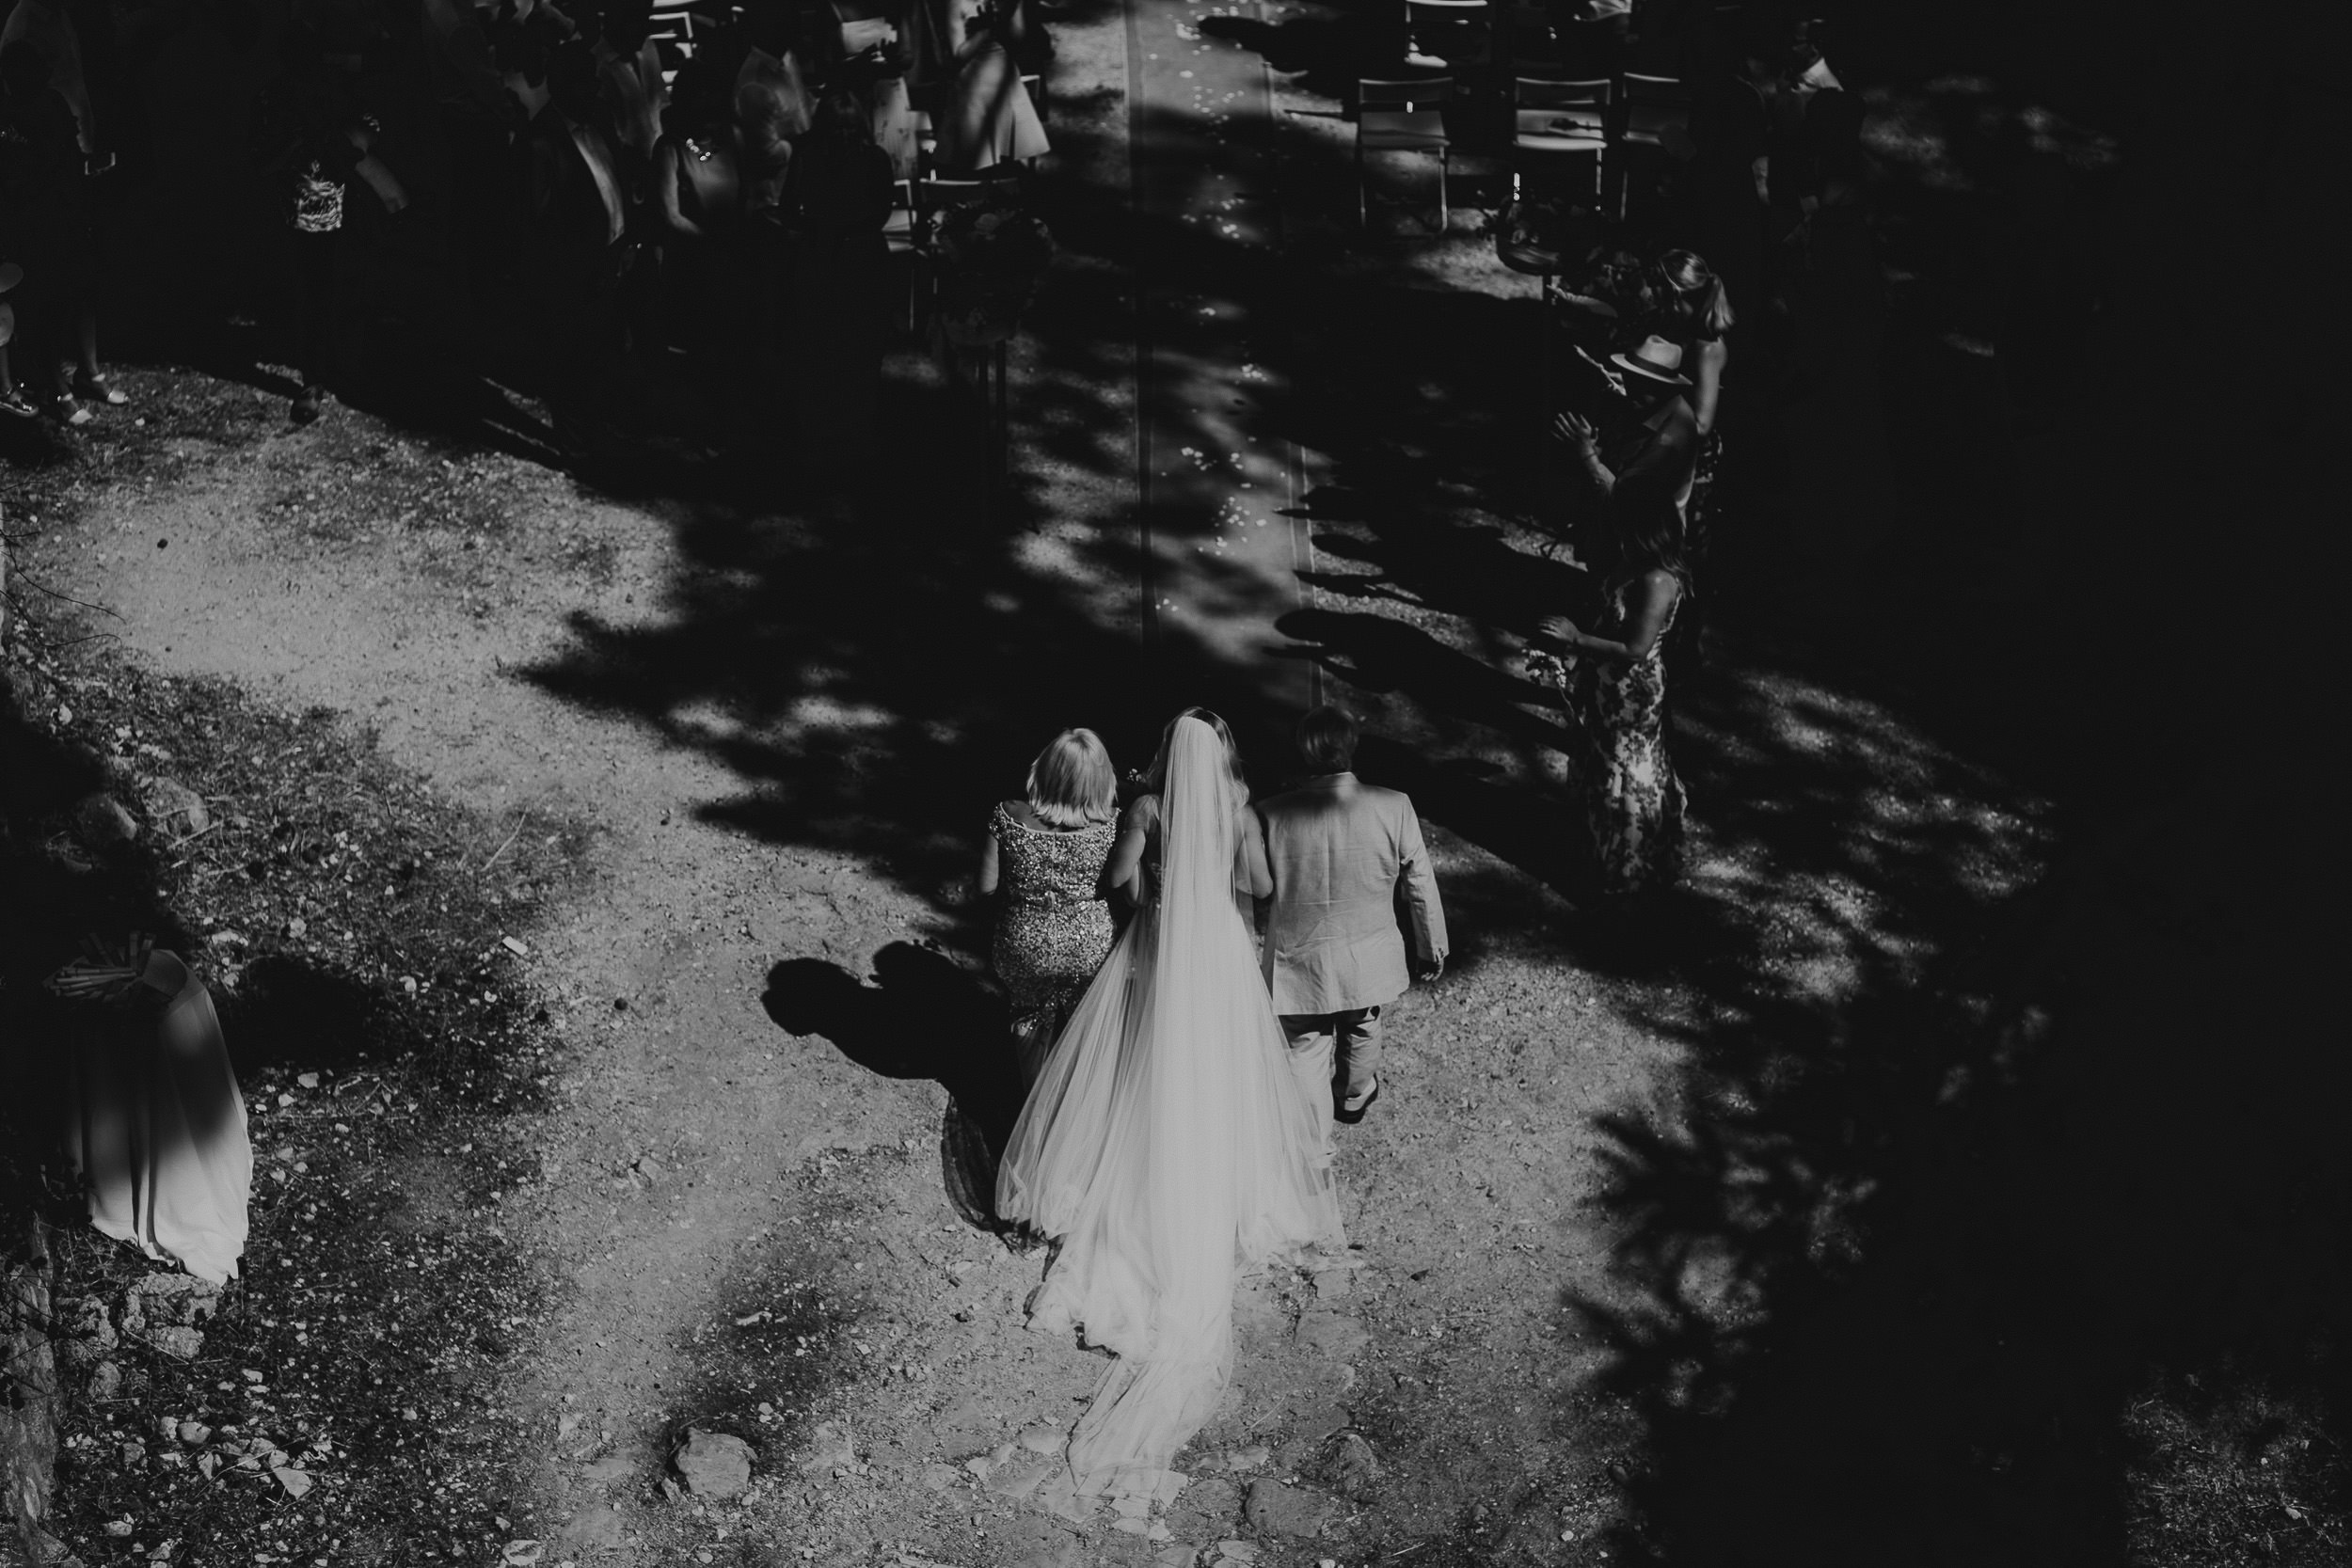 A wedding photographer captures a black and white photo of two brides walking down a path.